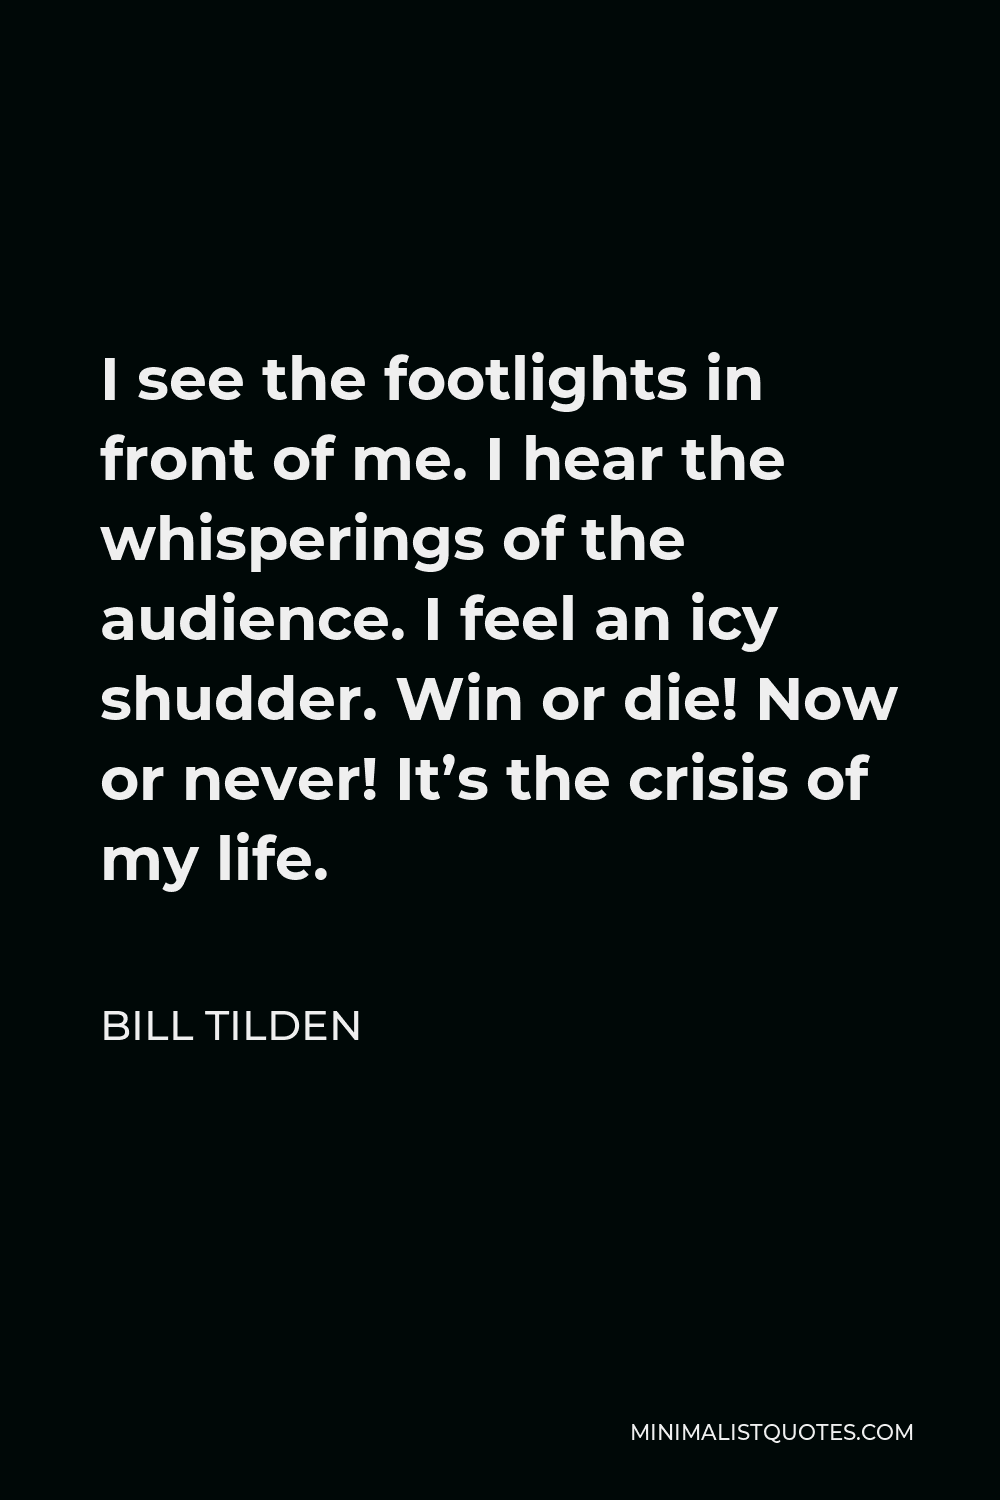 Bill Tilden Quote - I see the footlights in front of me. I hear the whisperings of the audience. I feel an icy shudder. Win or die! Now or never! It’s the crisis of my life.